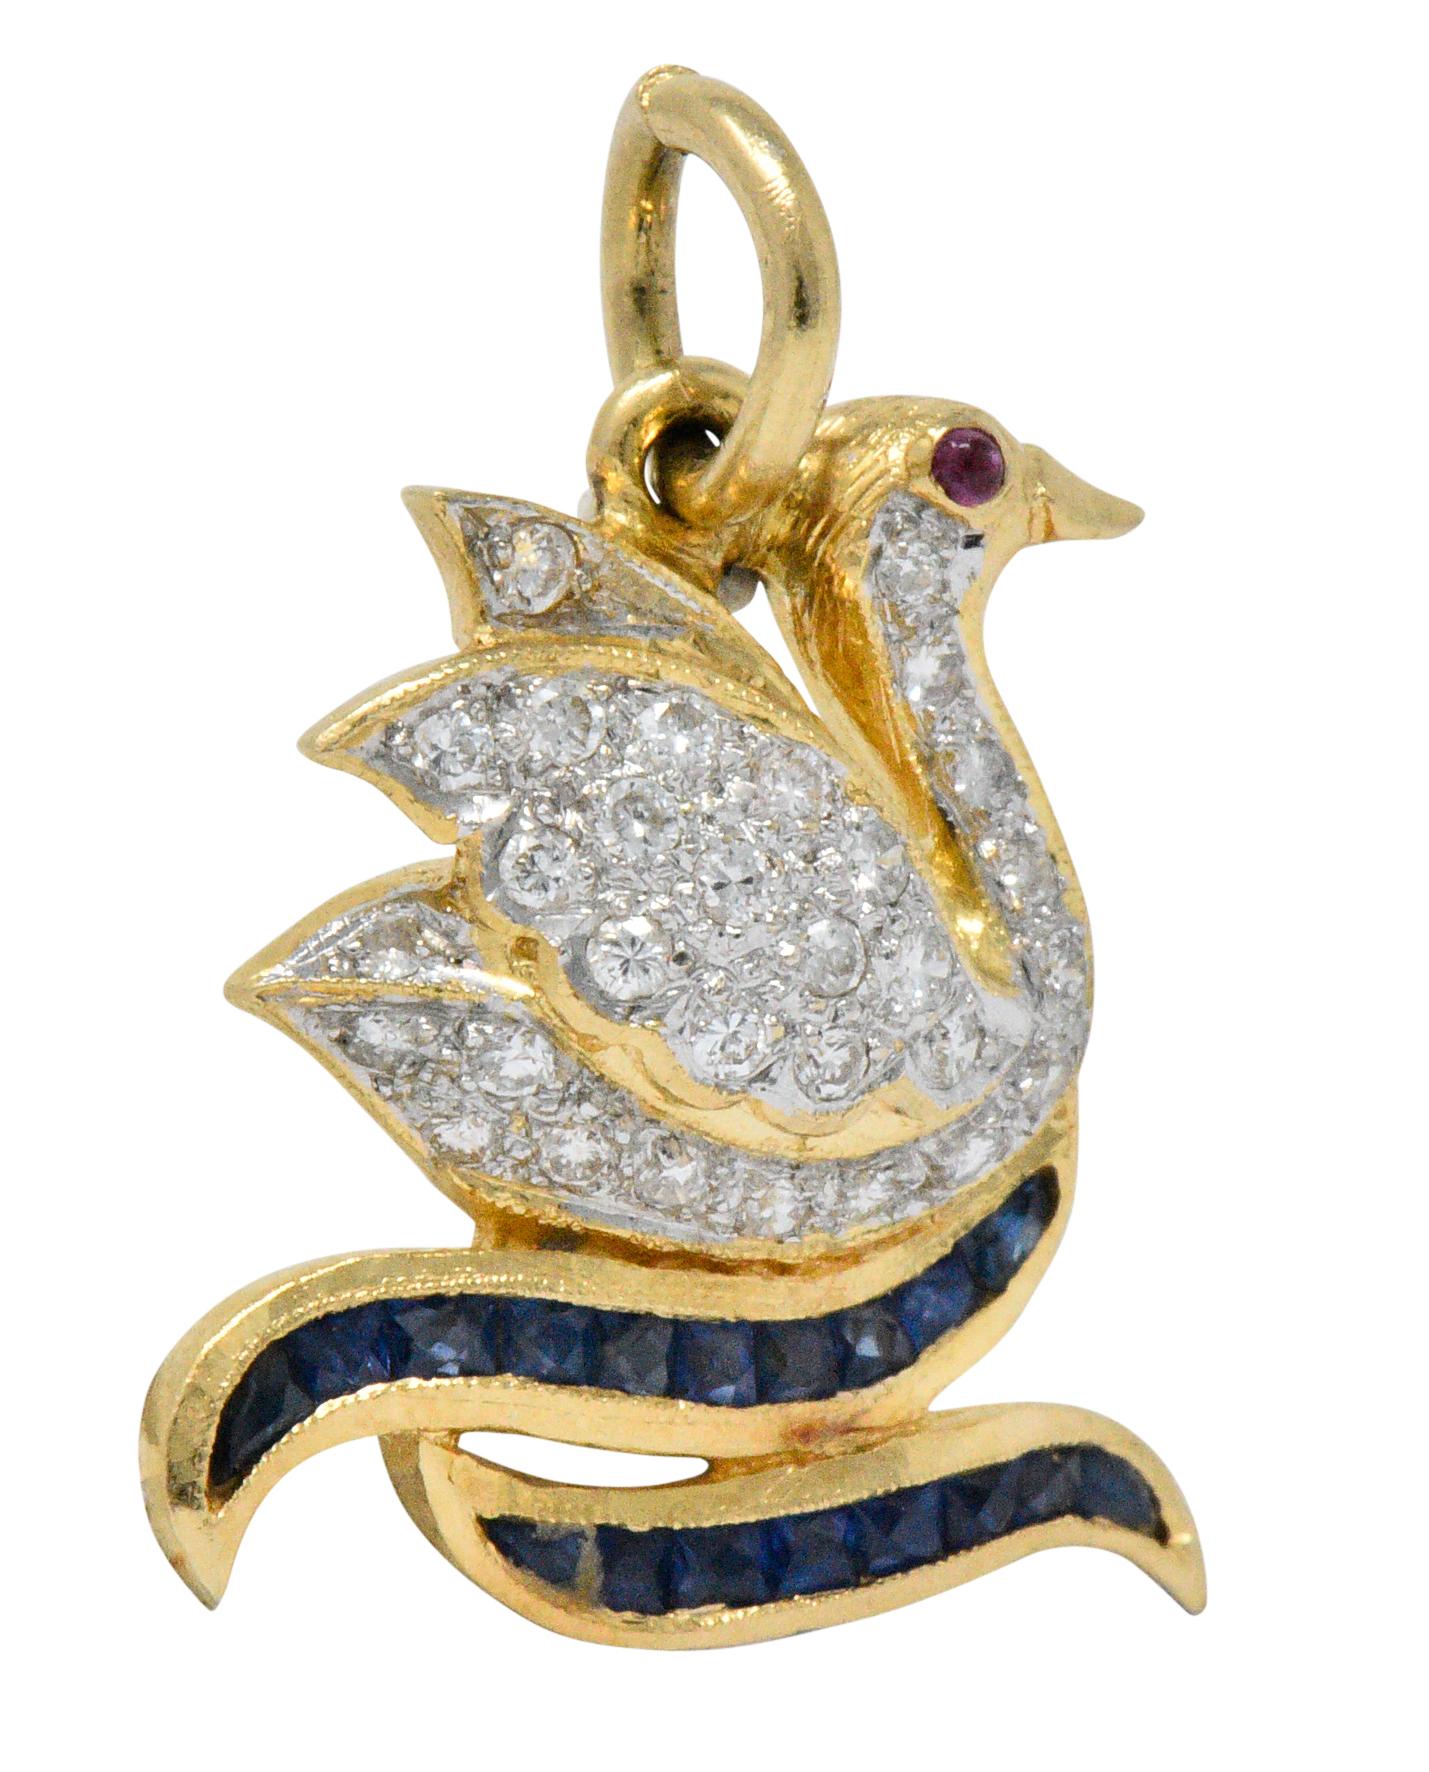 Designed as a swan on the water with pavé set round brilliant cut diamonds, weighing approximately 0.40 carat total, eye-clean and white
Accented by channel set calibré cut sapphire 'waves' and tiny round cabochon ruby eye

Tested as 18 karat